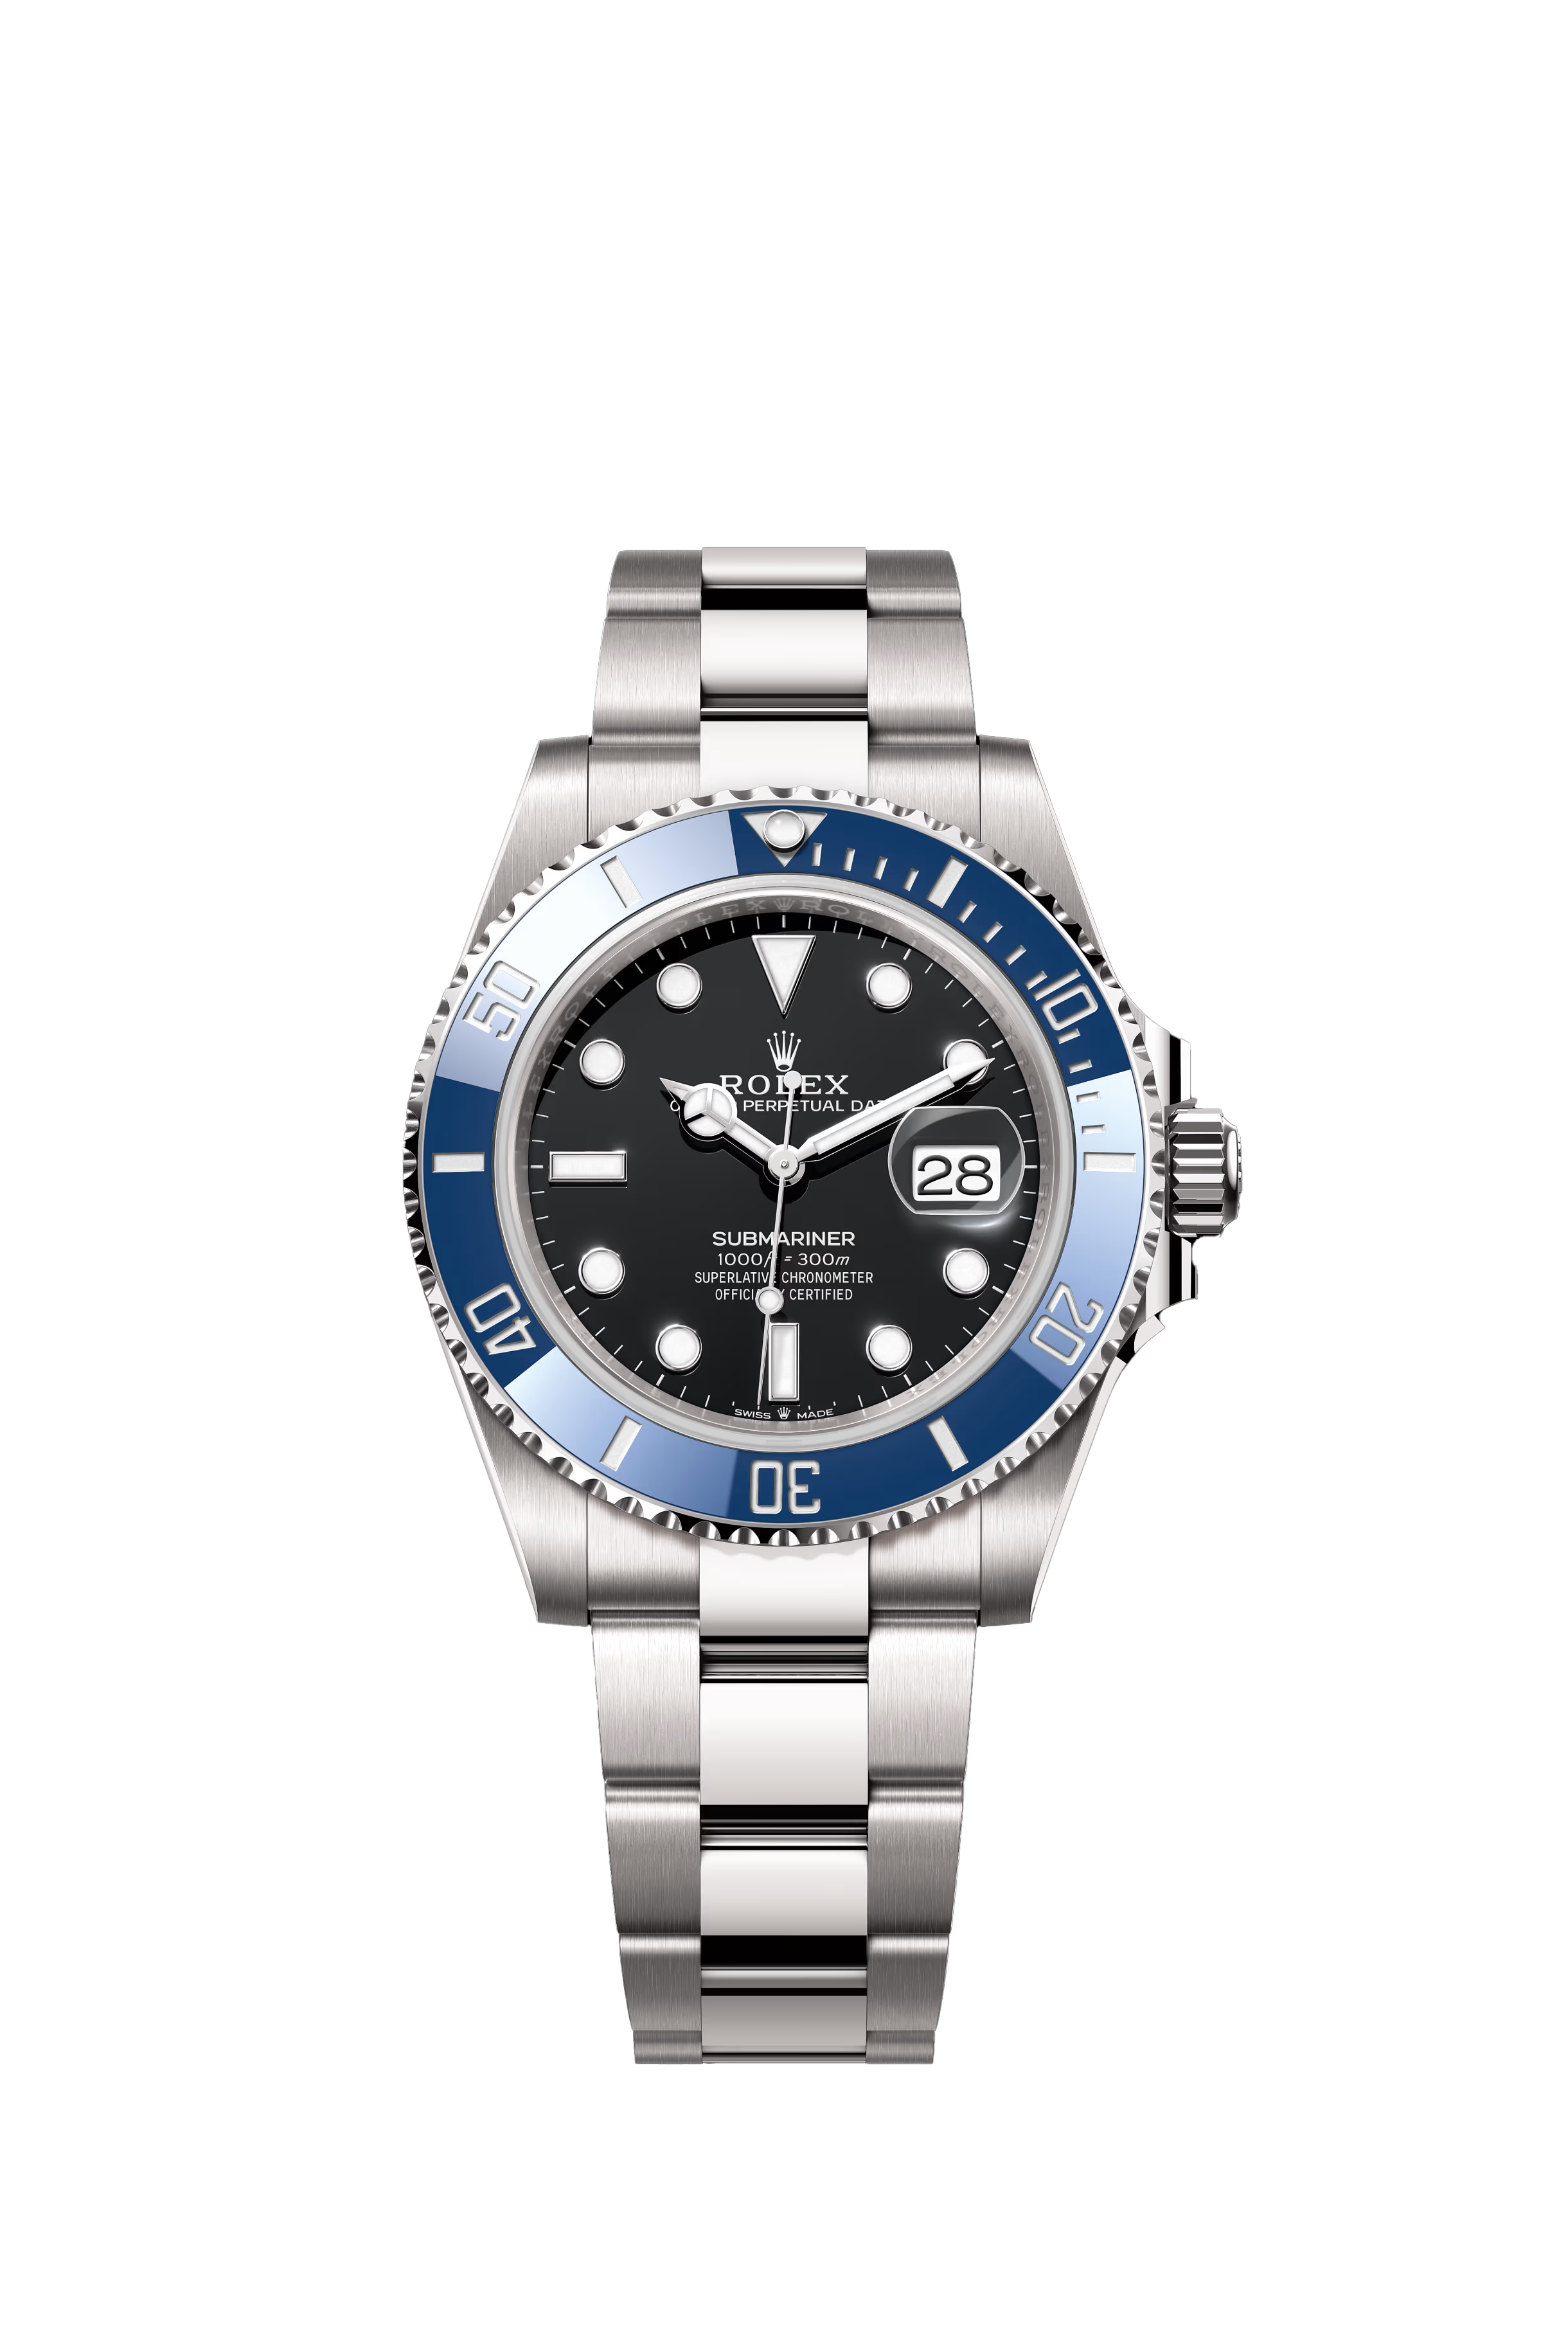 Rolex Submariner Date Oyster, 41 mm, white gold Reference 126619LB